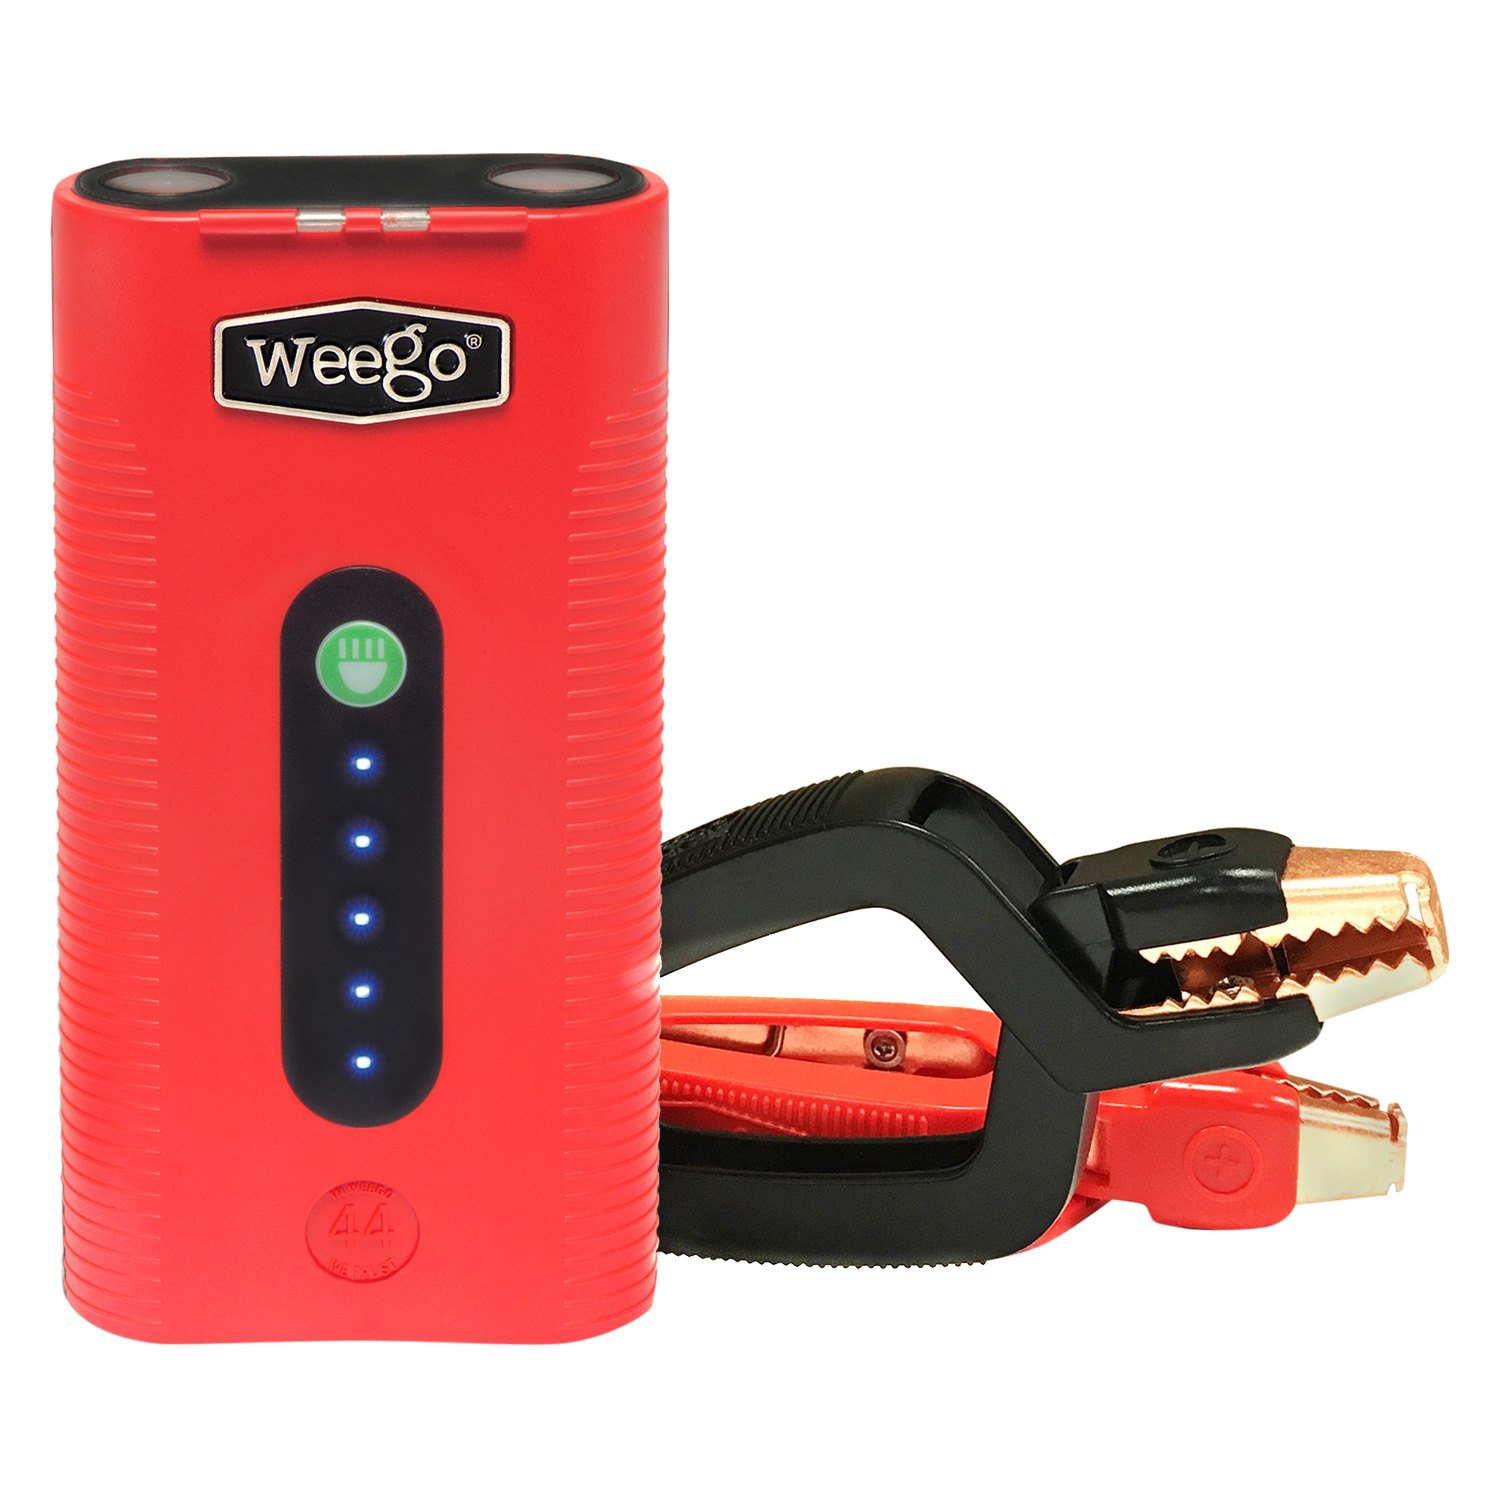 Battery compact. Multi-function Jump Starter плата. Multi-function Jump Starter. Portable Lithium Lifter.